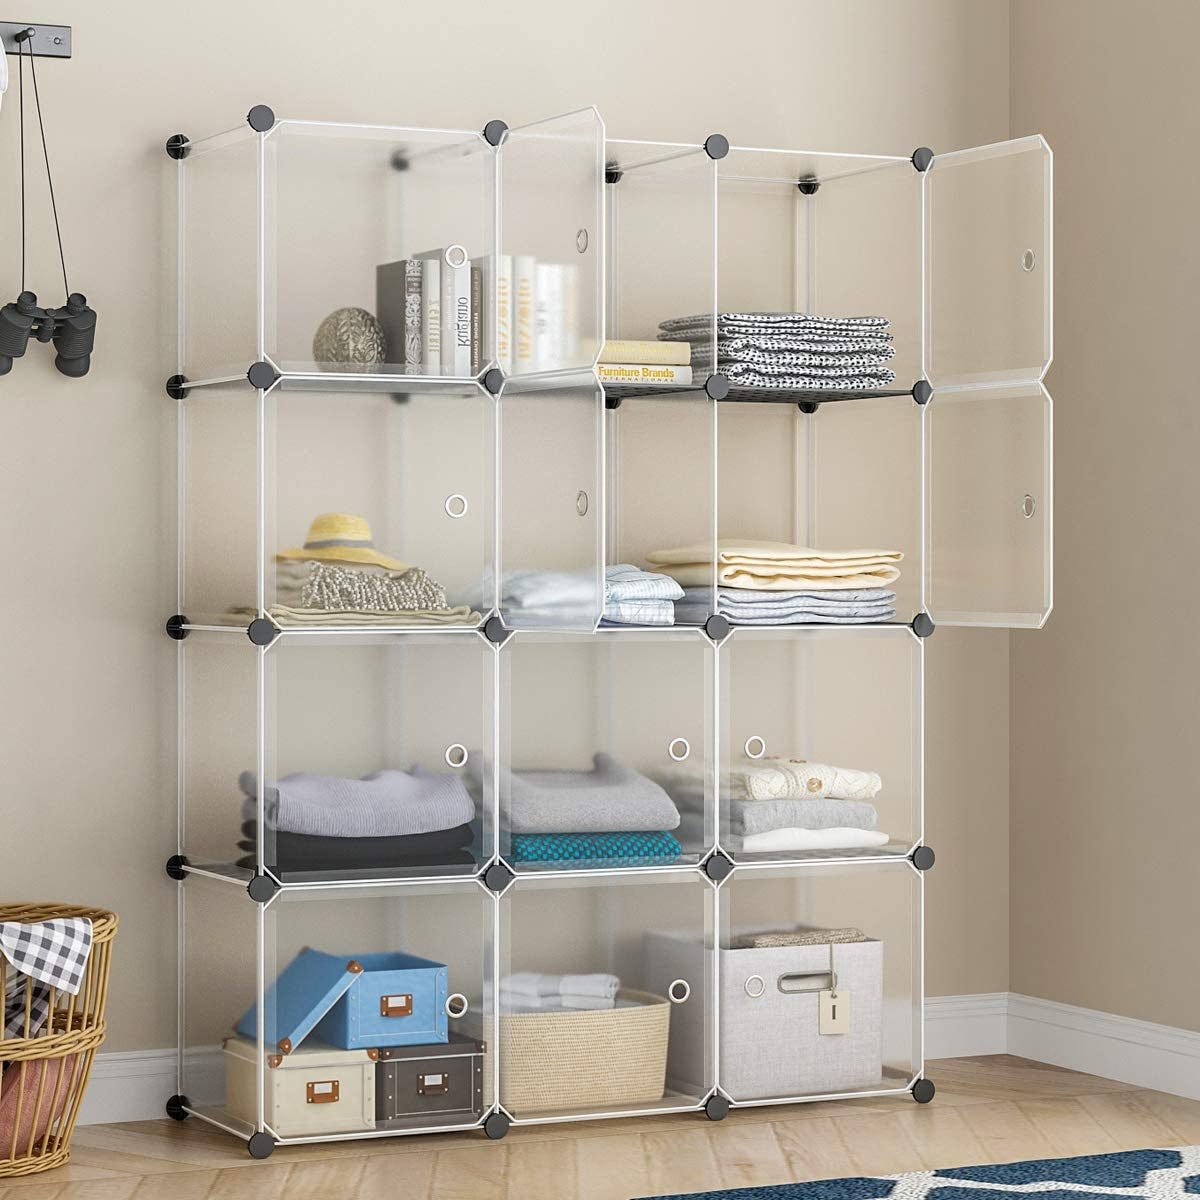 Clothes Storage Ideas: 19 Storage Ideas for Small Spaces